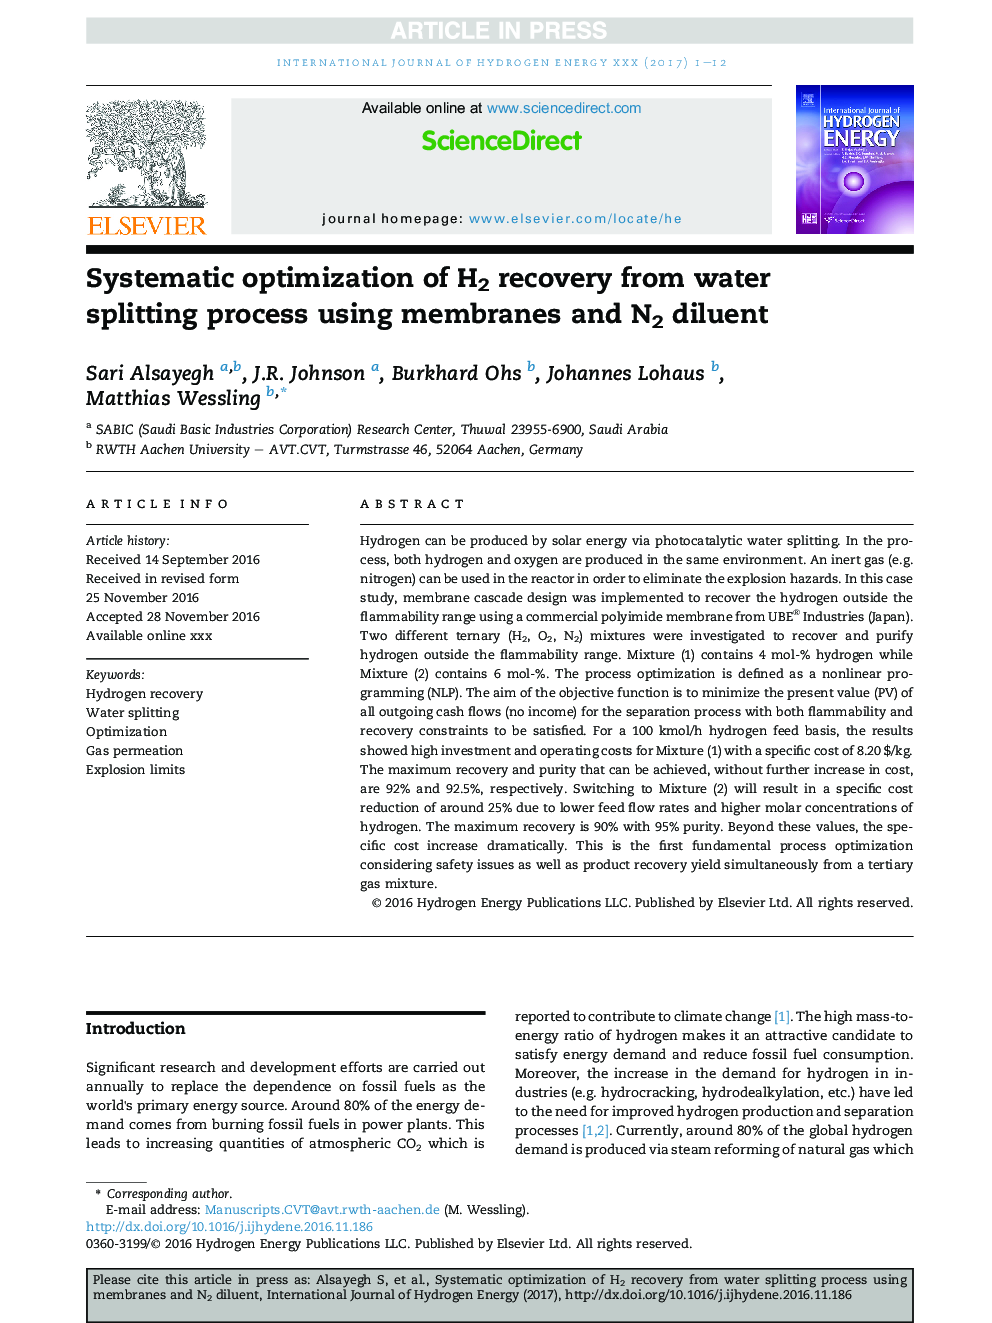 Systematic optimization of H2 recovery from water splitting process using membranes and N2 diluent